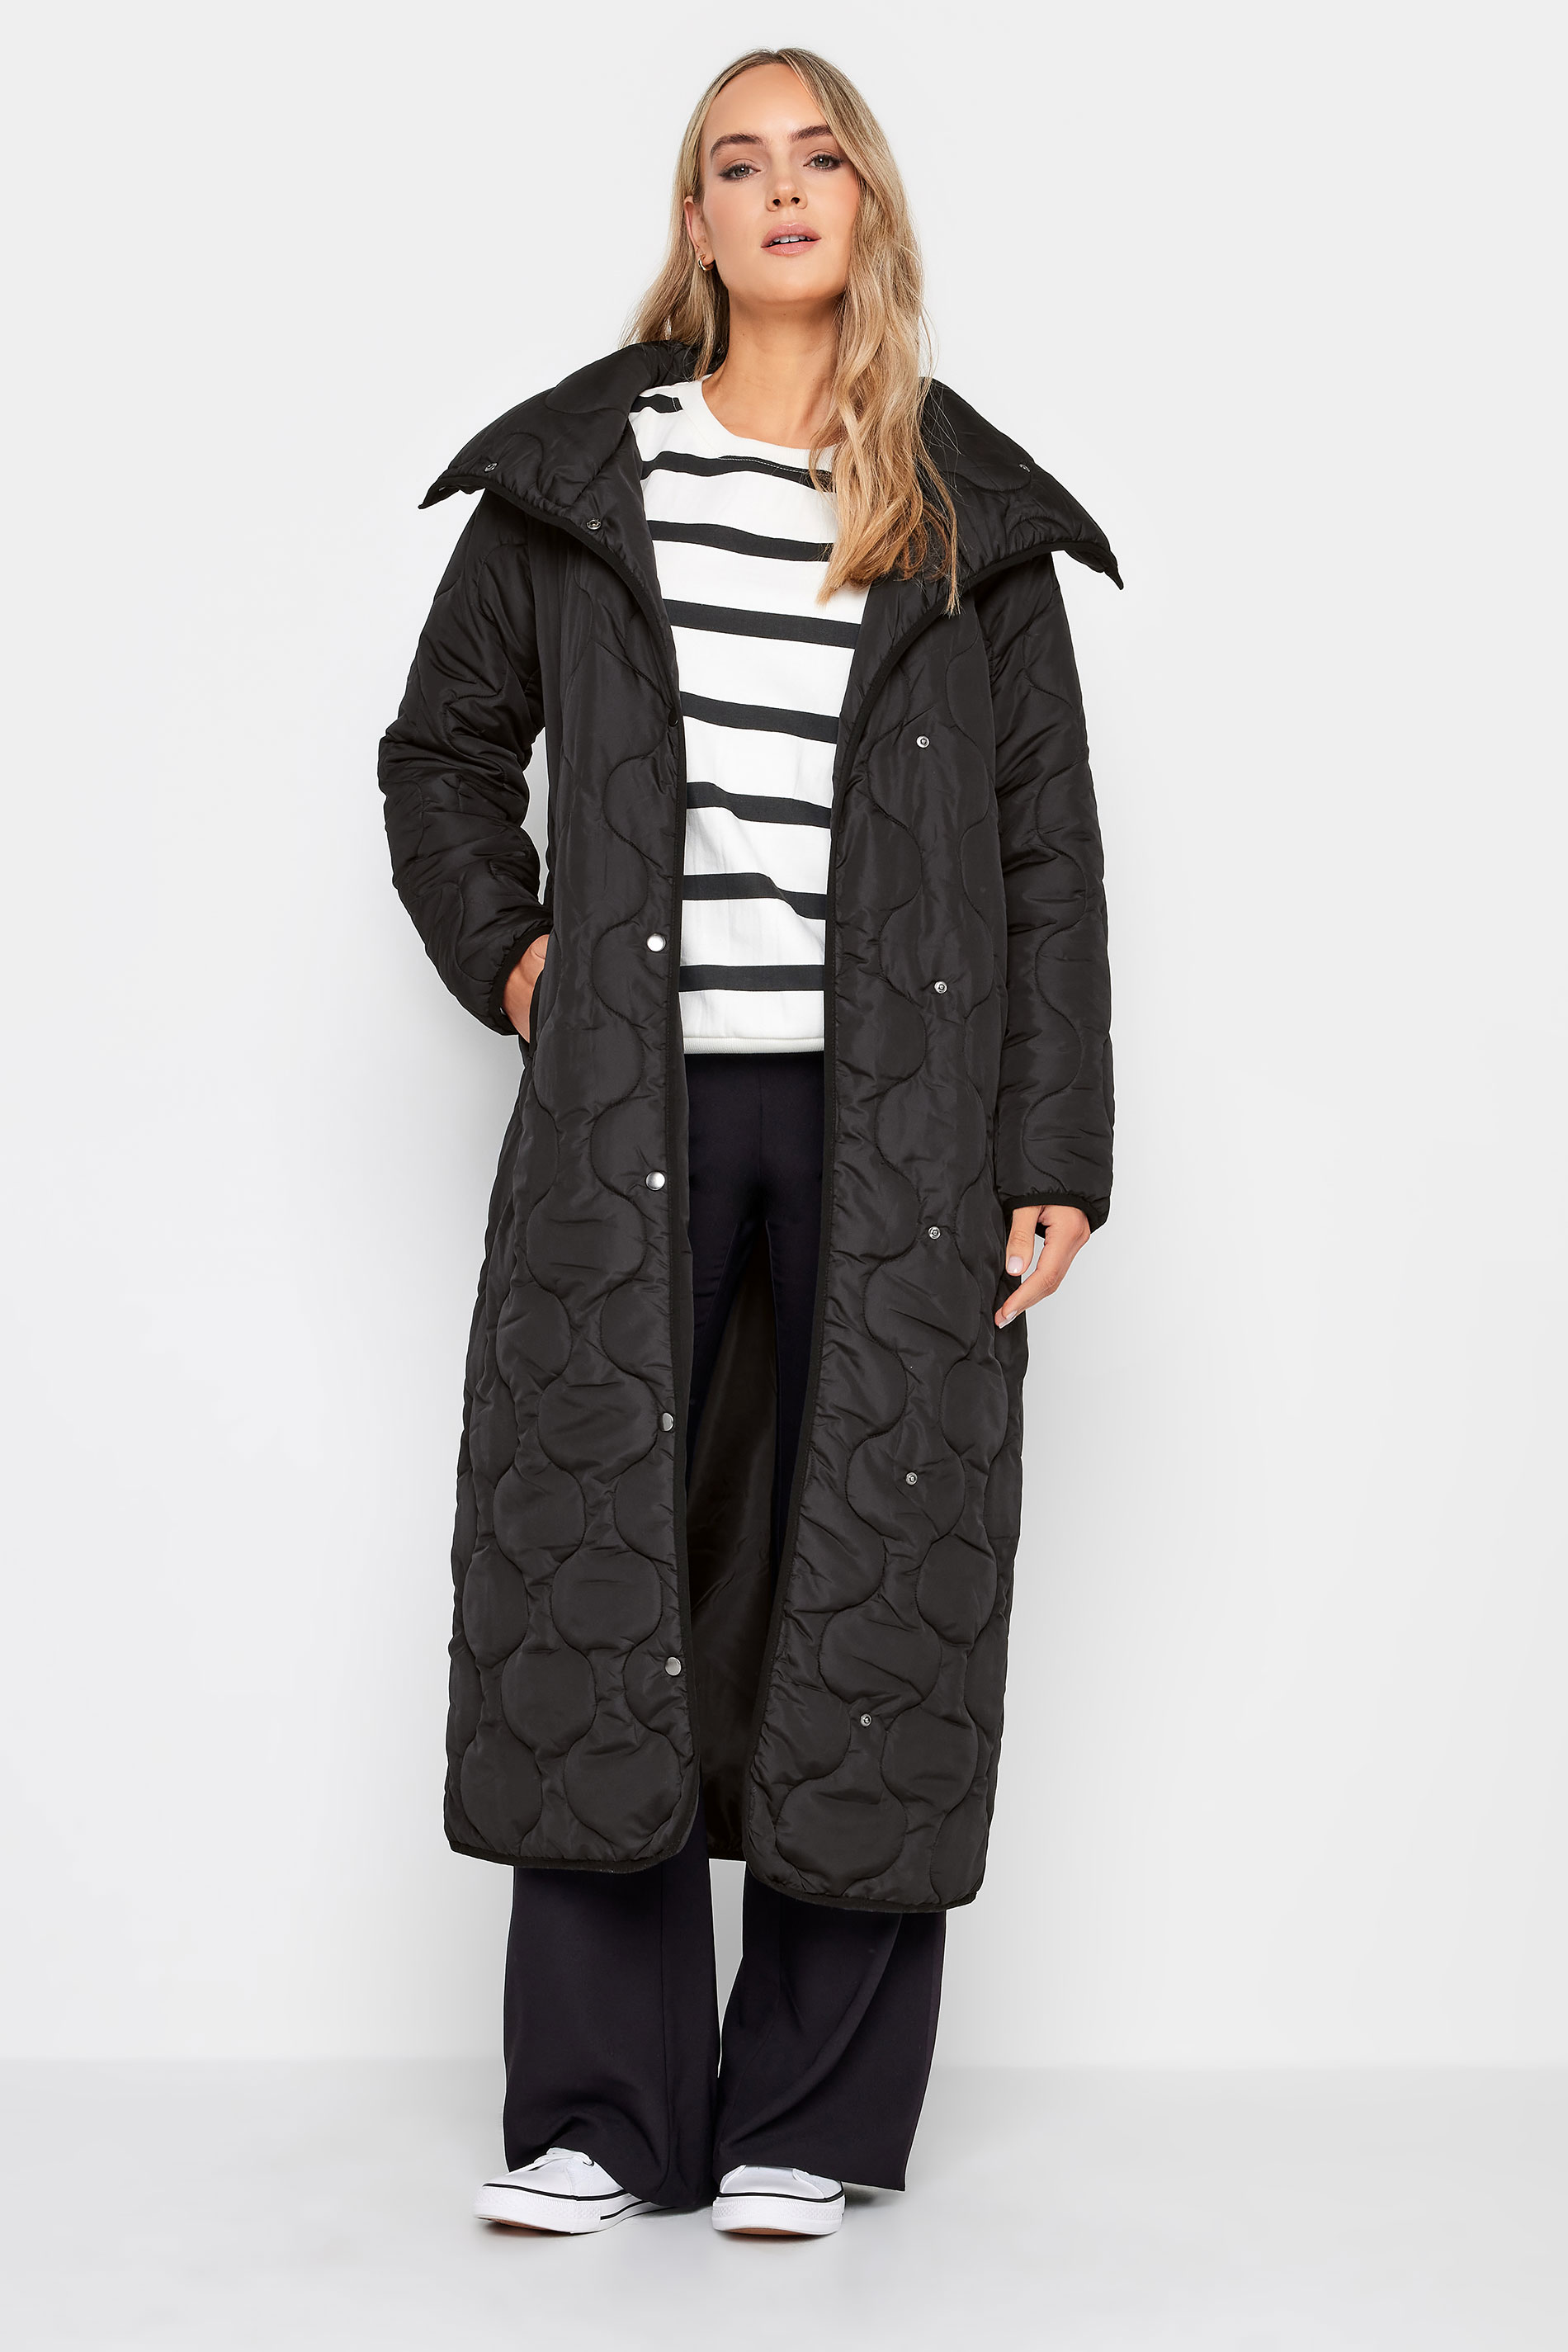 LTS Tall Black Funnel Neck Quilted Coat | Long Tall Sally 1